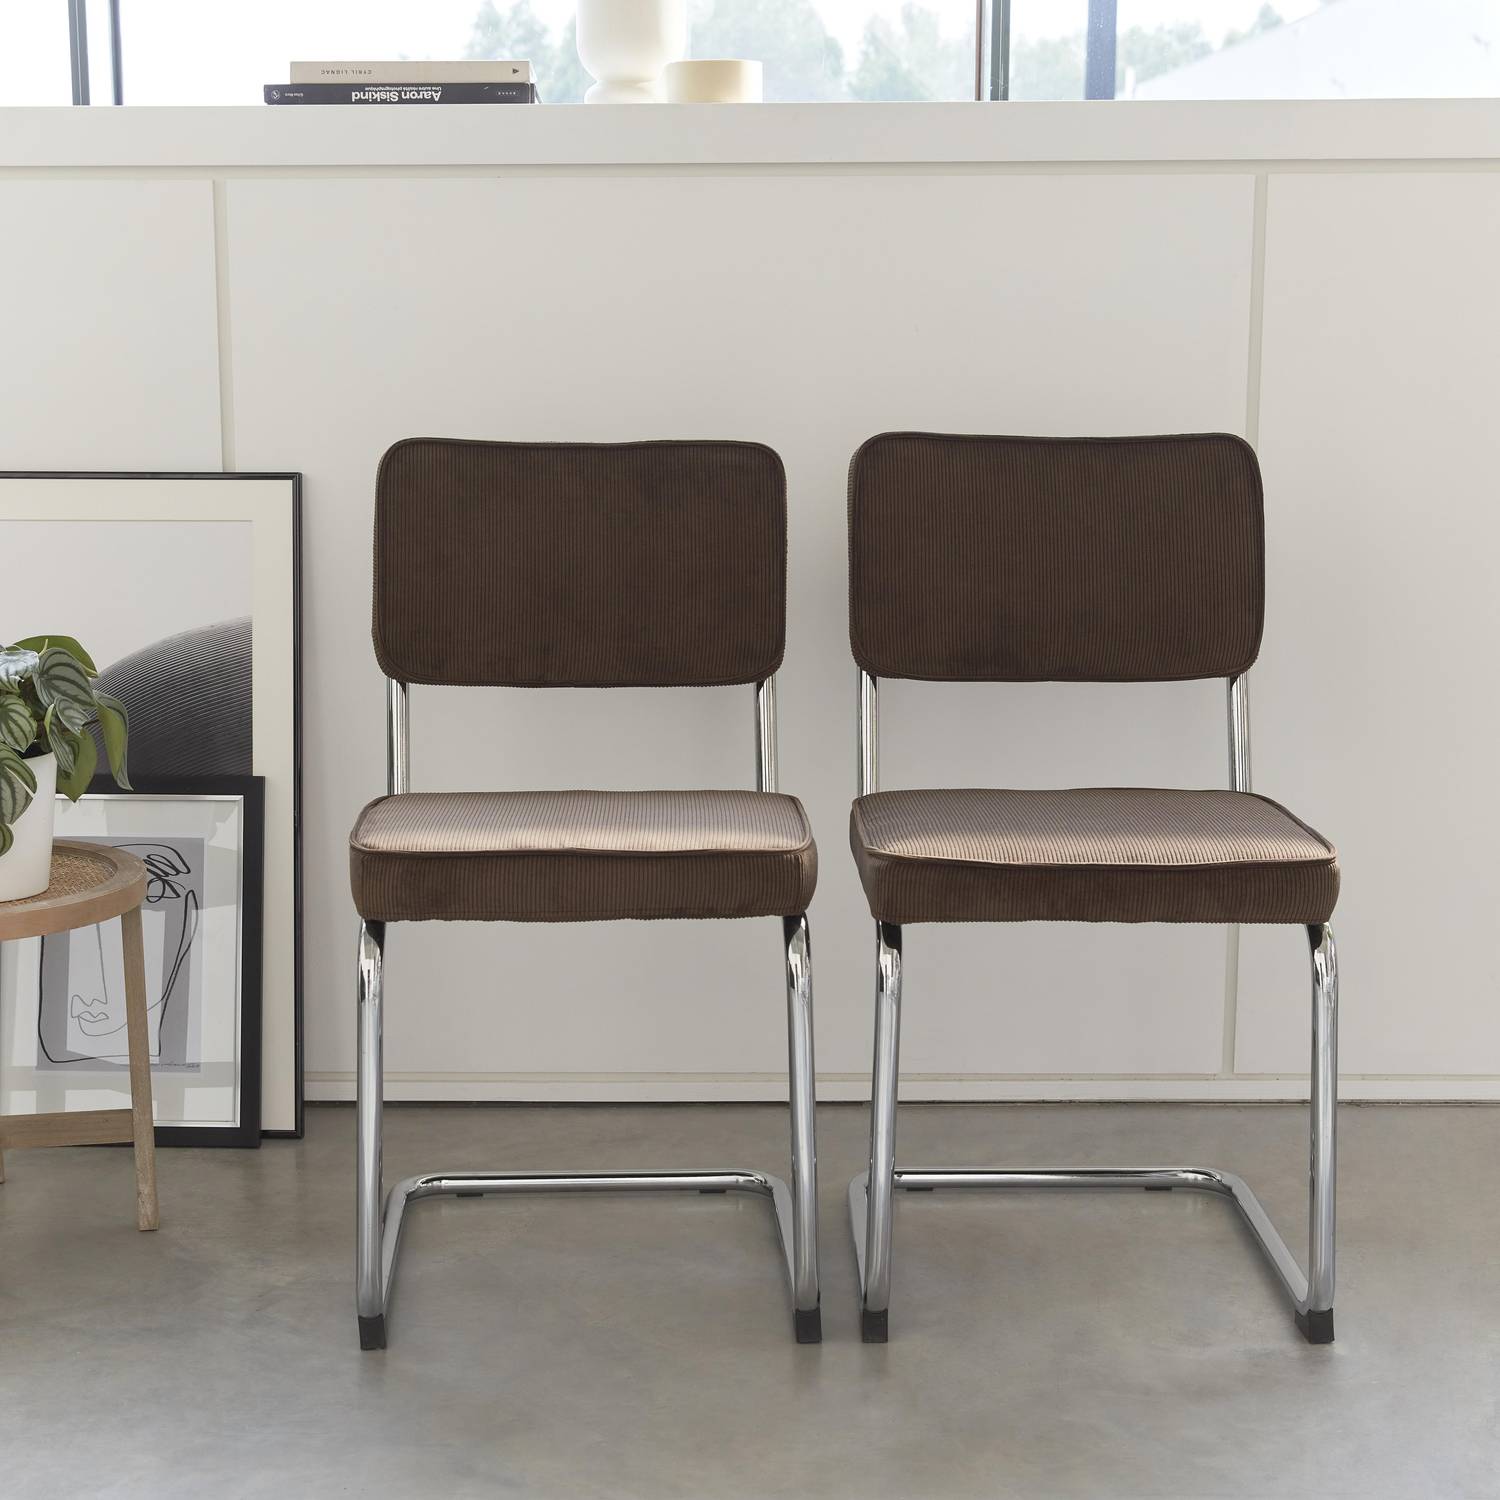 Pair of corduroy cantilever dining chairs, 46x54.5x84.5cm - Maja - Brown Photo2